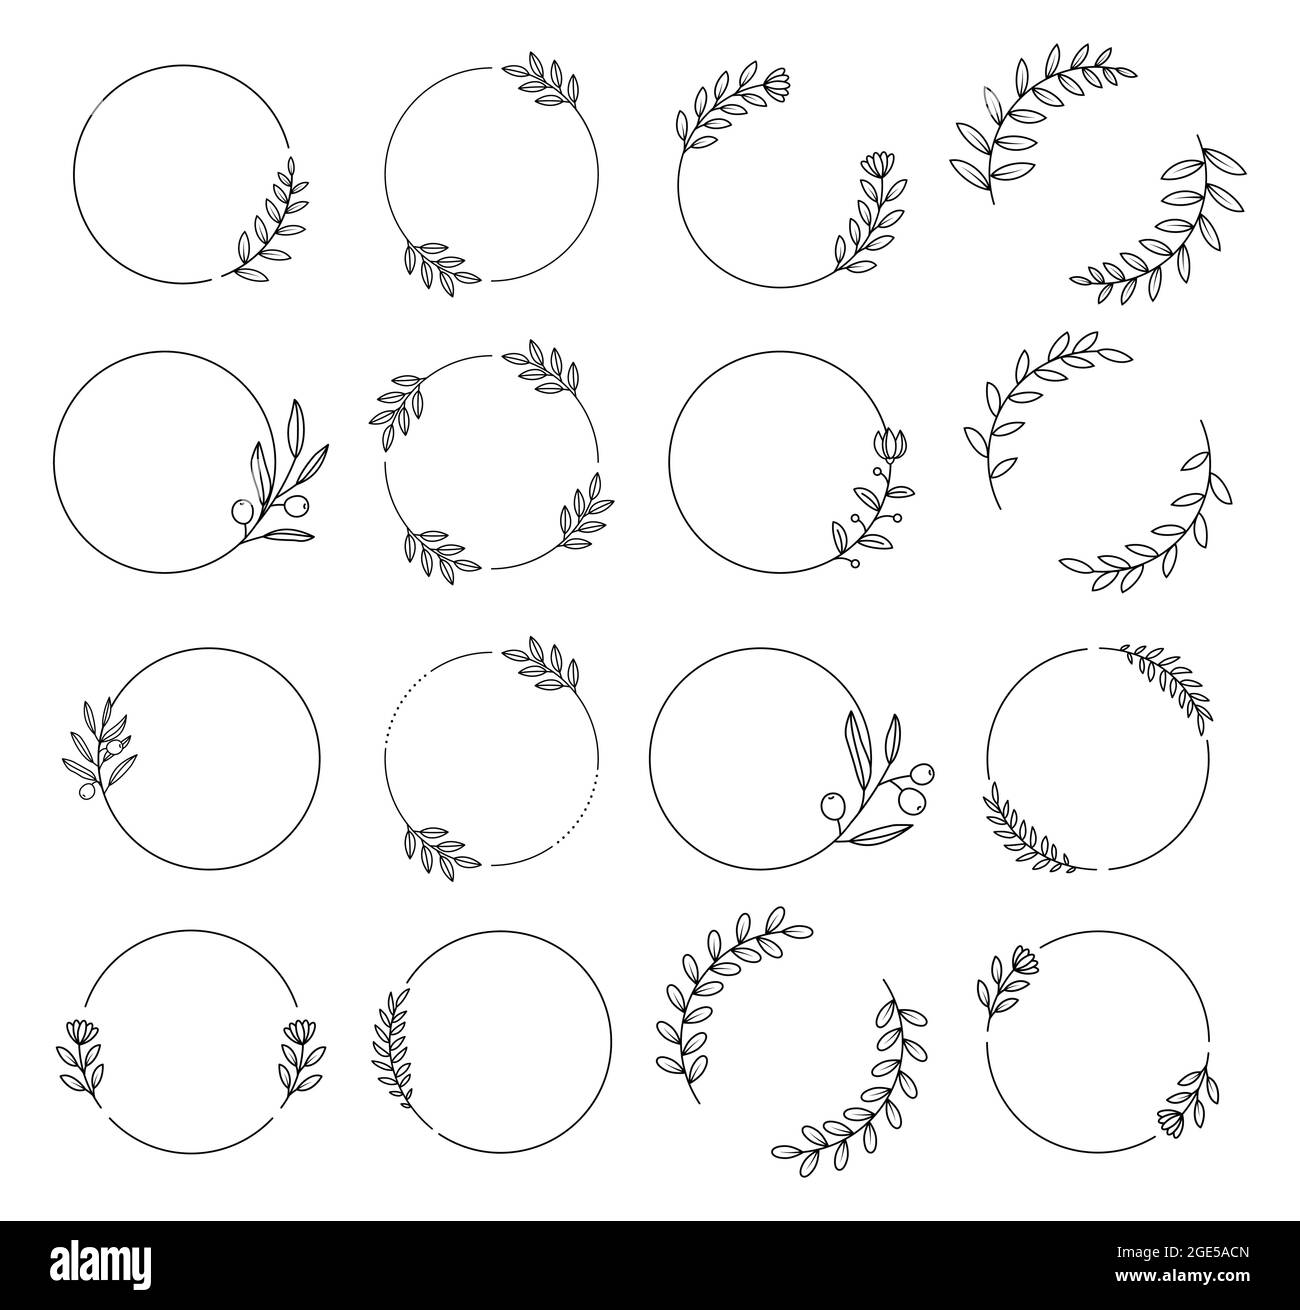 Floral wreath with leaves hand drawn round frames. Wedding wreath decorative leaves elements vintage. Stock Vector